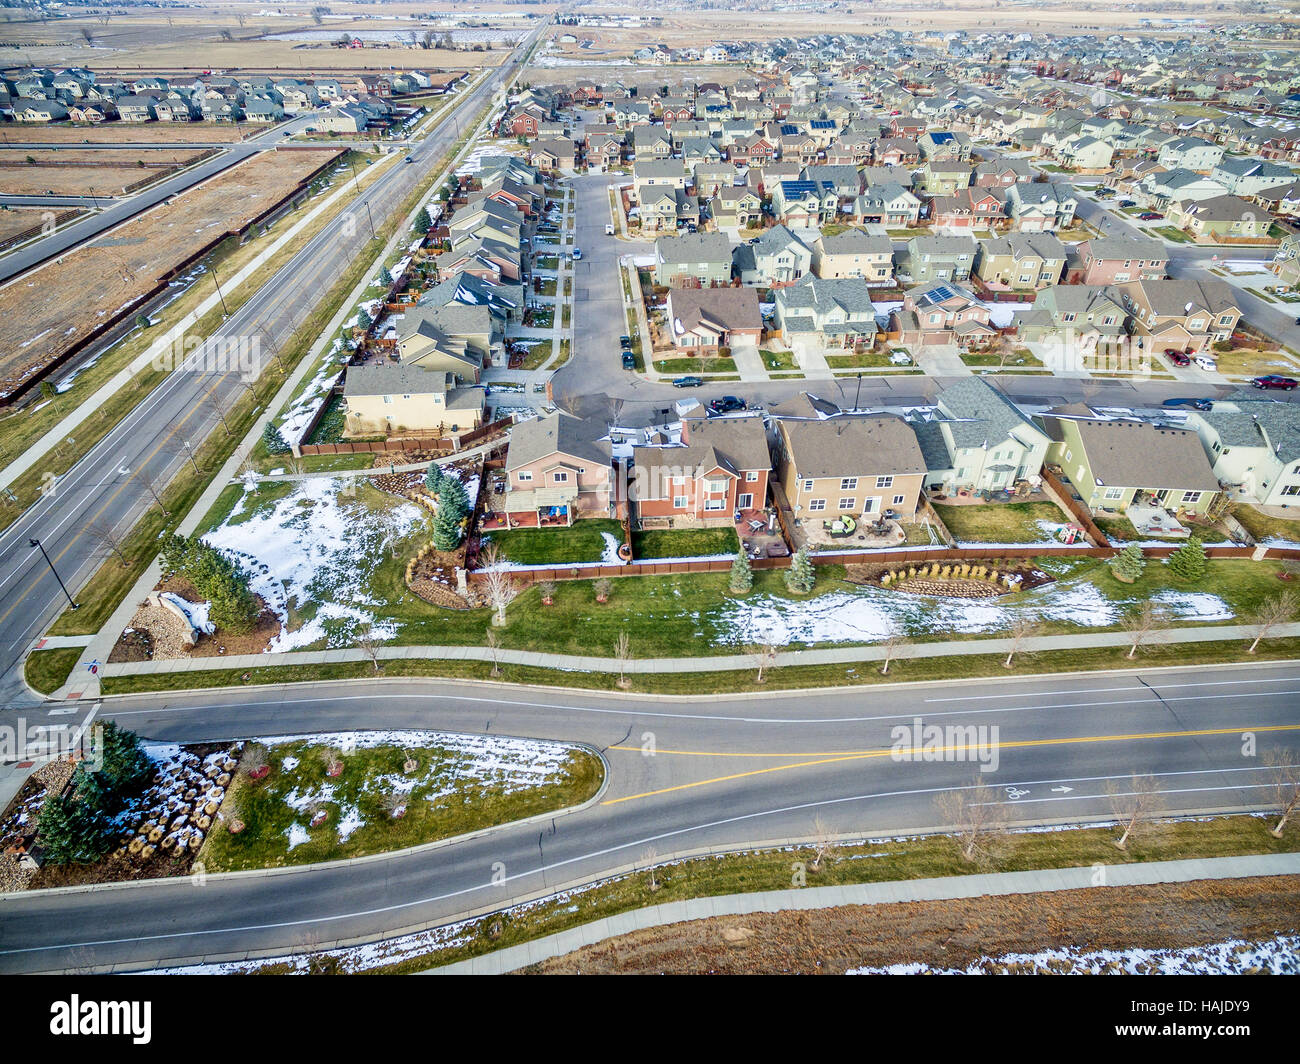 A new house development along Front Range in northern Colorado, aerial view Stock Photo